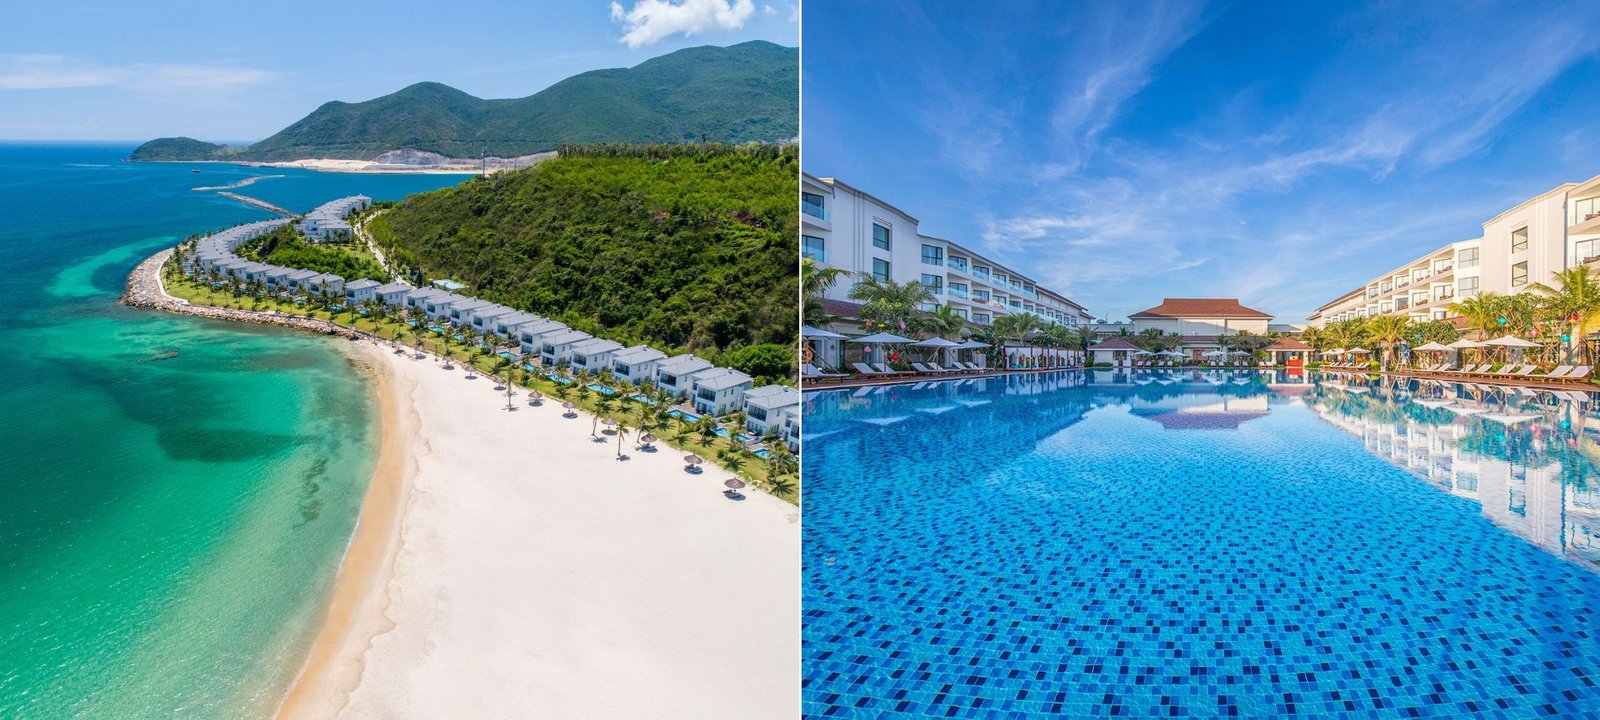 Marriott International expands its footprint in Vietnam, cooperating with Vinpearl to manage 7 new hotels